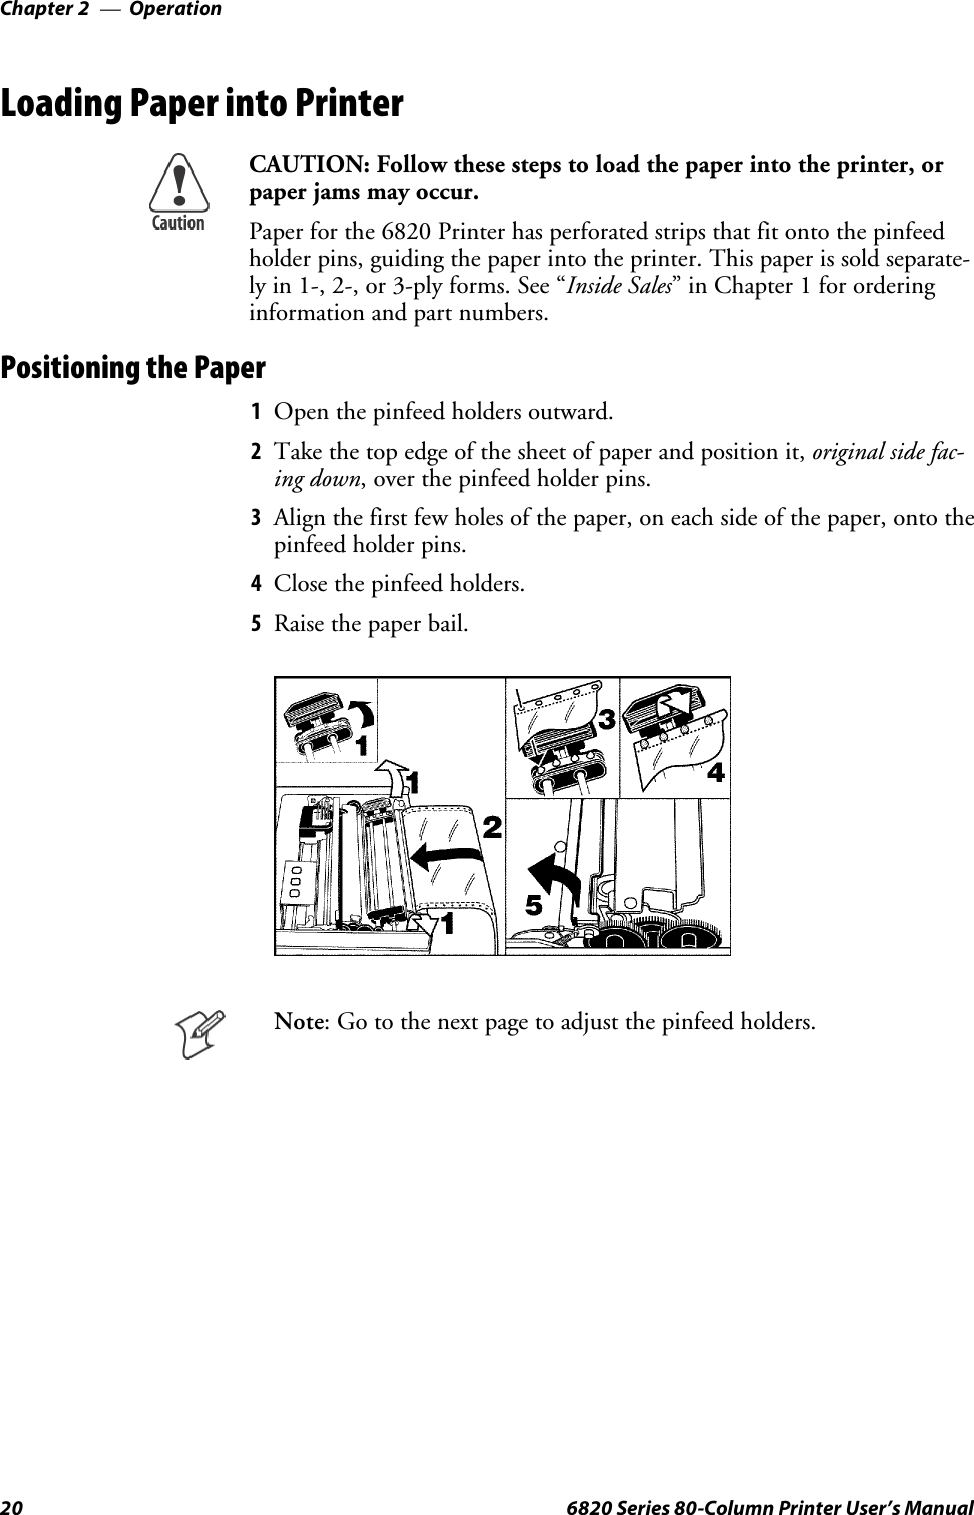 OperationChapter —220 6820 Series 80-Column Printer User’s ManualLoading Paper into PrinterCAUTION: Follow these steps to load the paper into the printer, orpaper jams may occur.Paper for the 6820 Printer has perforated strips that fit onto the pinfeedholder pins, guiding the paper into the printer. This paper is sold separate-ly in 1-, 2-, or 3-ply forms. See “Inside Sales” in Chapter 1 for orderinginformation and part numbers.Positioning the Paper1Open the pinfeed holders outward.2Take the top edge of the sheet of paper and position it, original side fac-ing down, over the pinfeed holder pins.3Align the first few holes of the paper, on each side of the paper, onto thepinfeed holder pins.4Close the pinfeed holders.5Raise the paper bail.Note: Go to the next page to adjust the pinfeed holders.